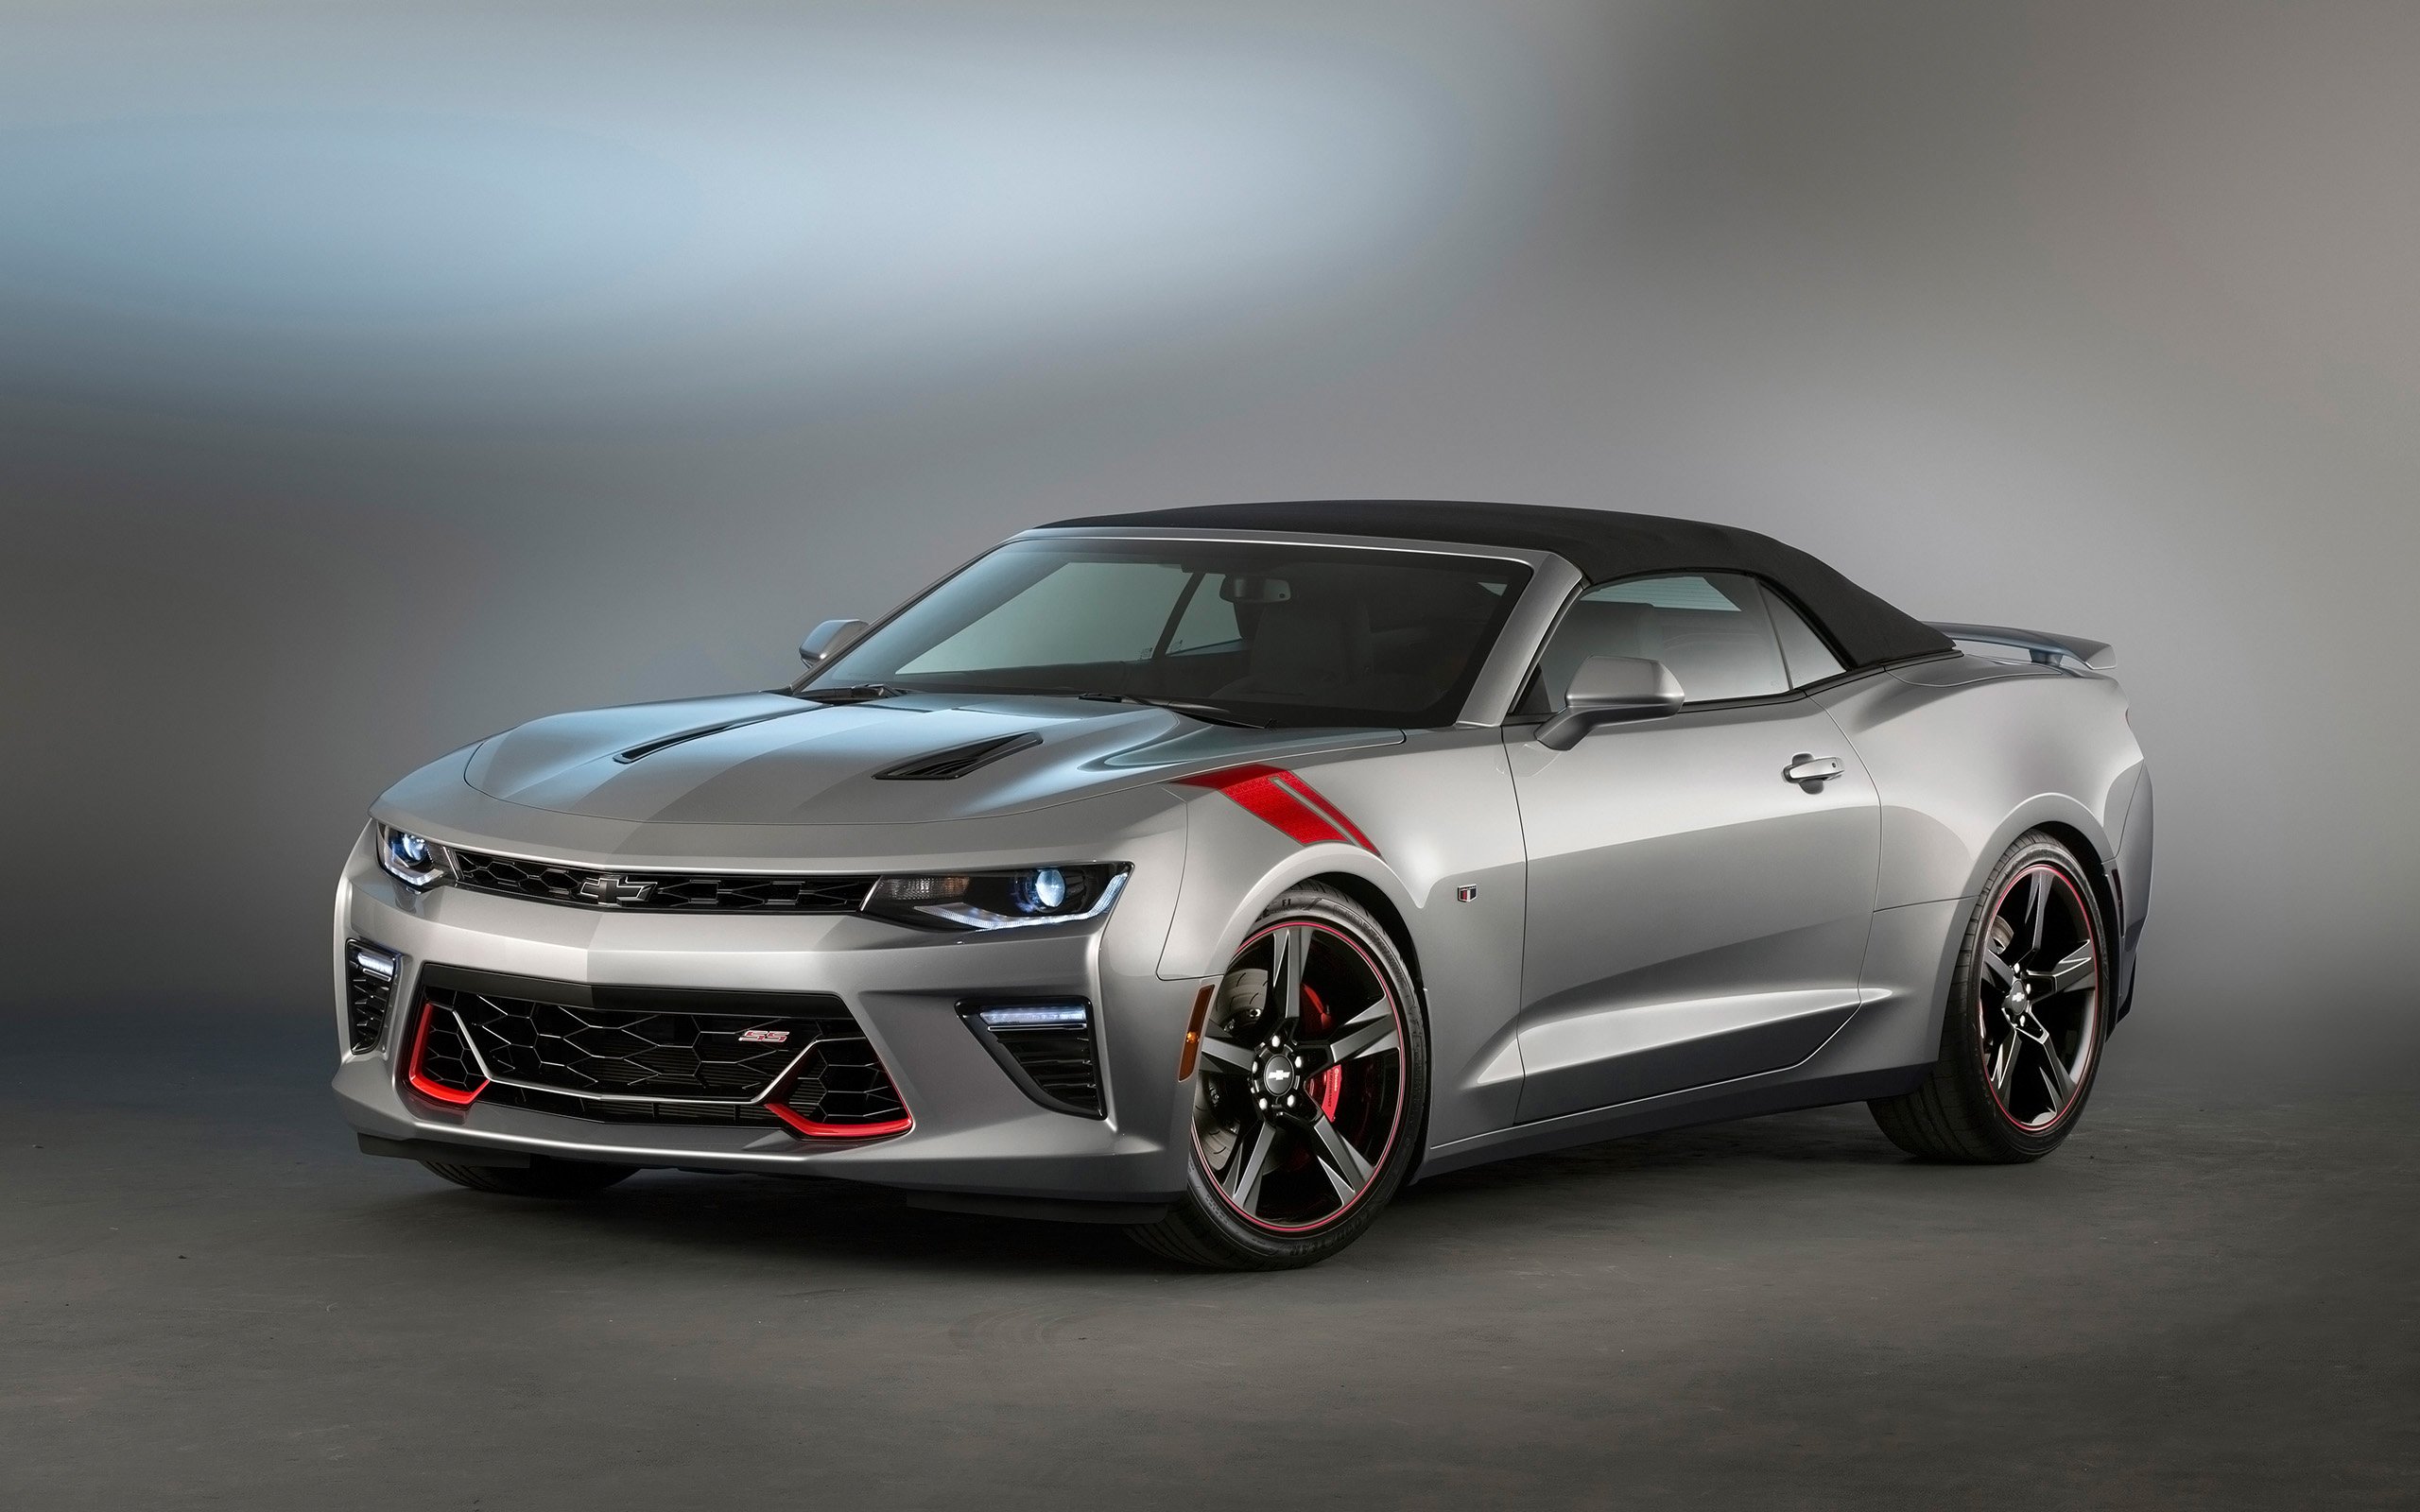 2016, Chevrolet, Camaro, S s, Accent, Concept, Muscle, Tuning Wallpaper